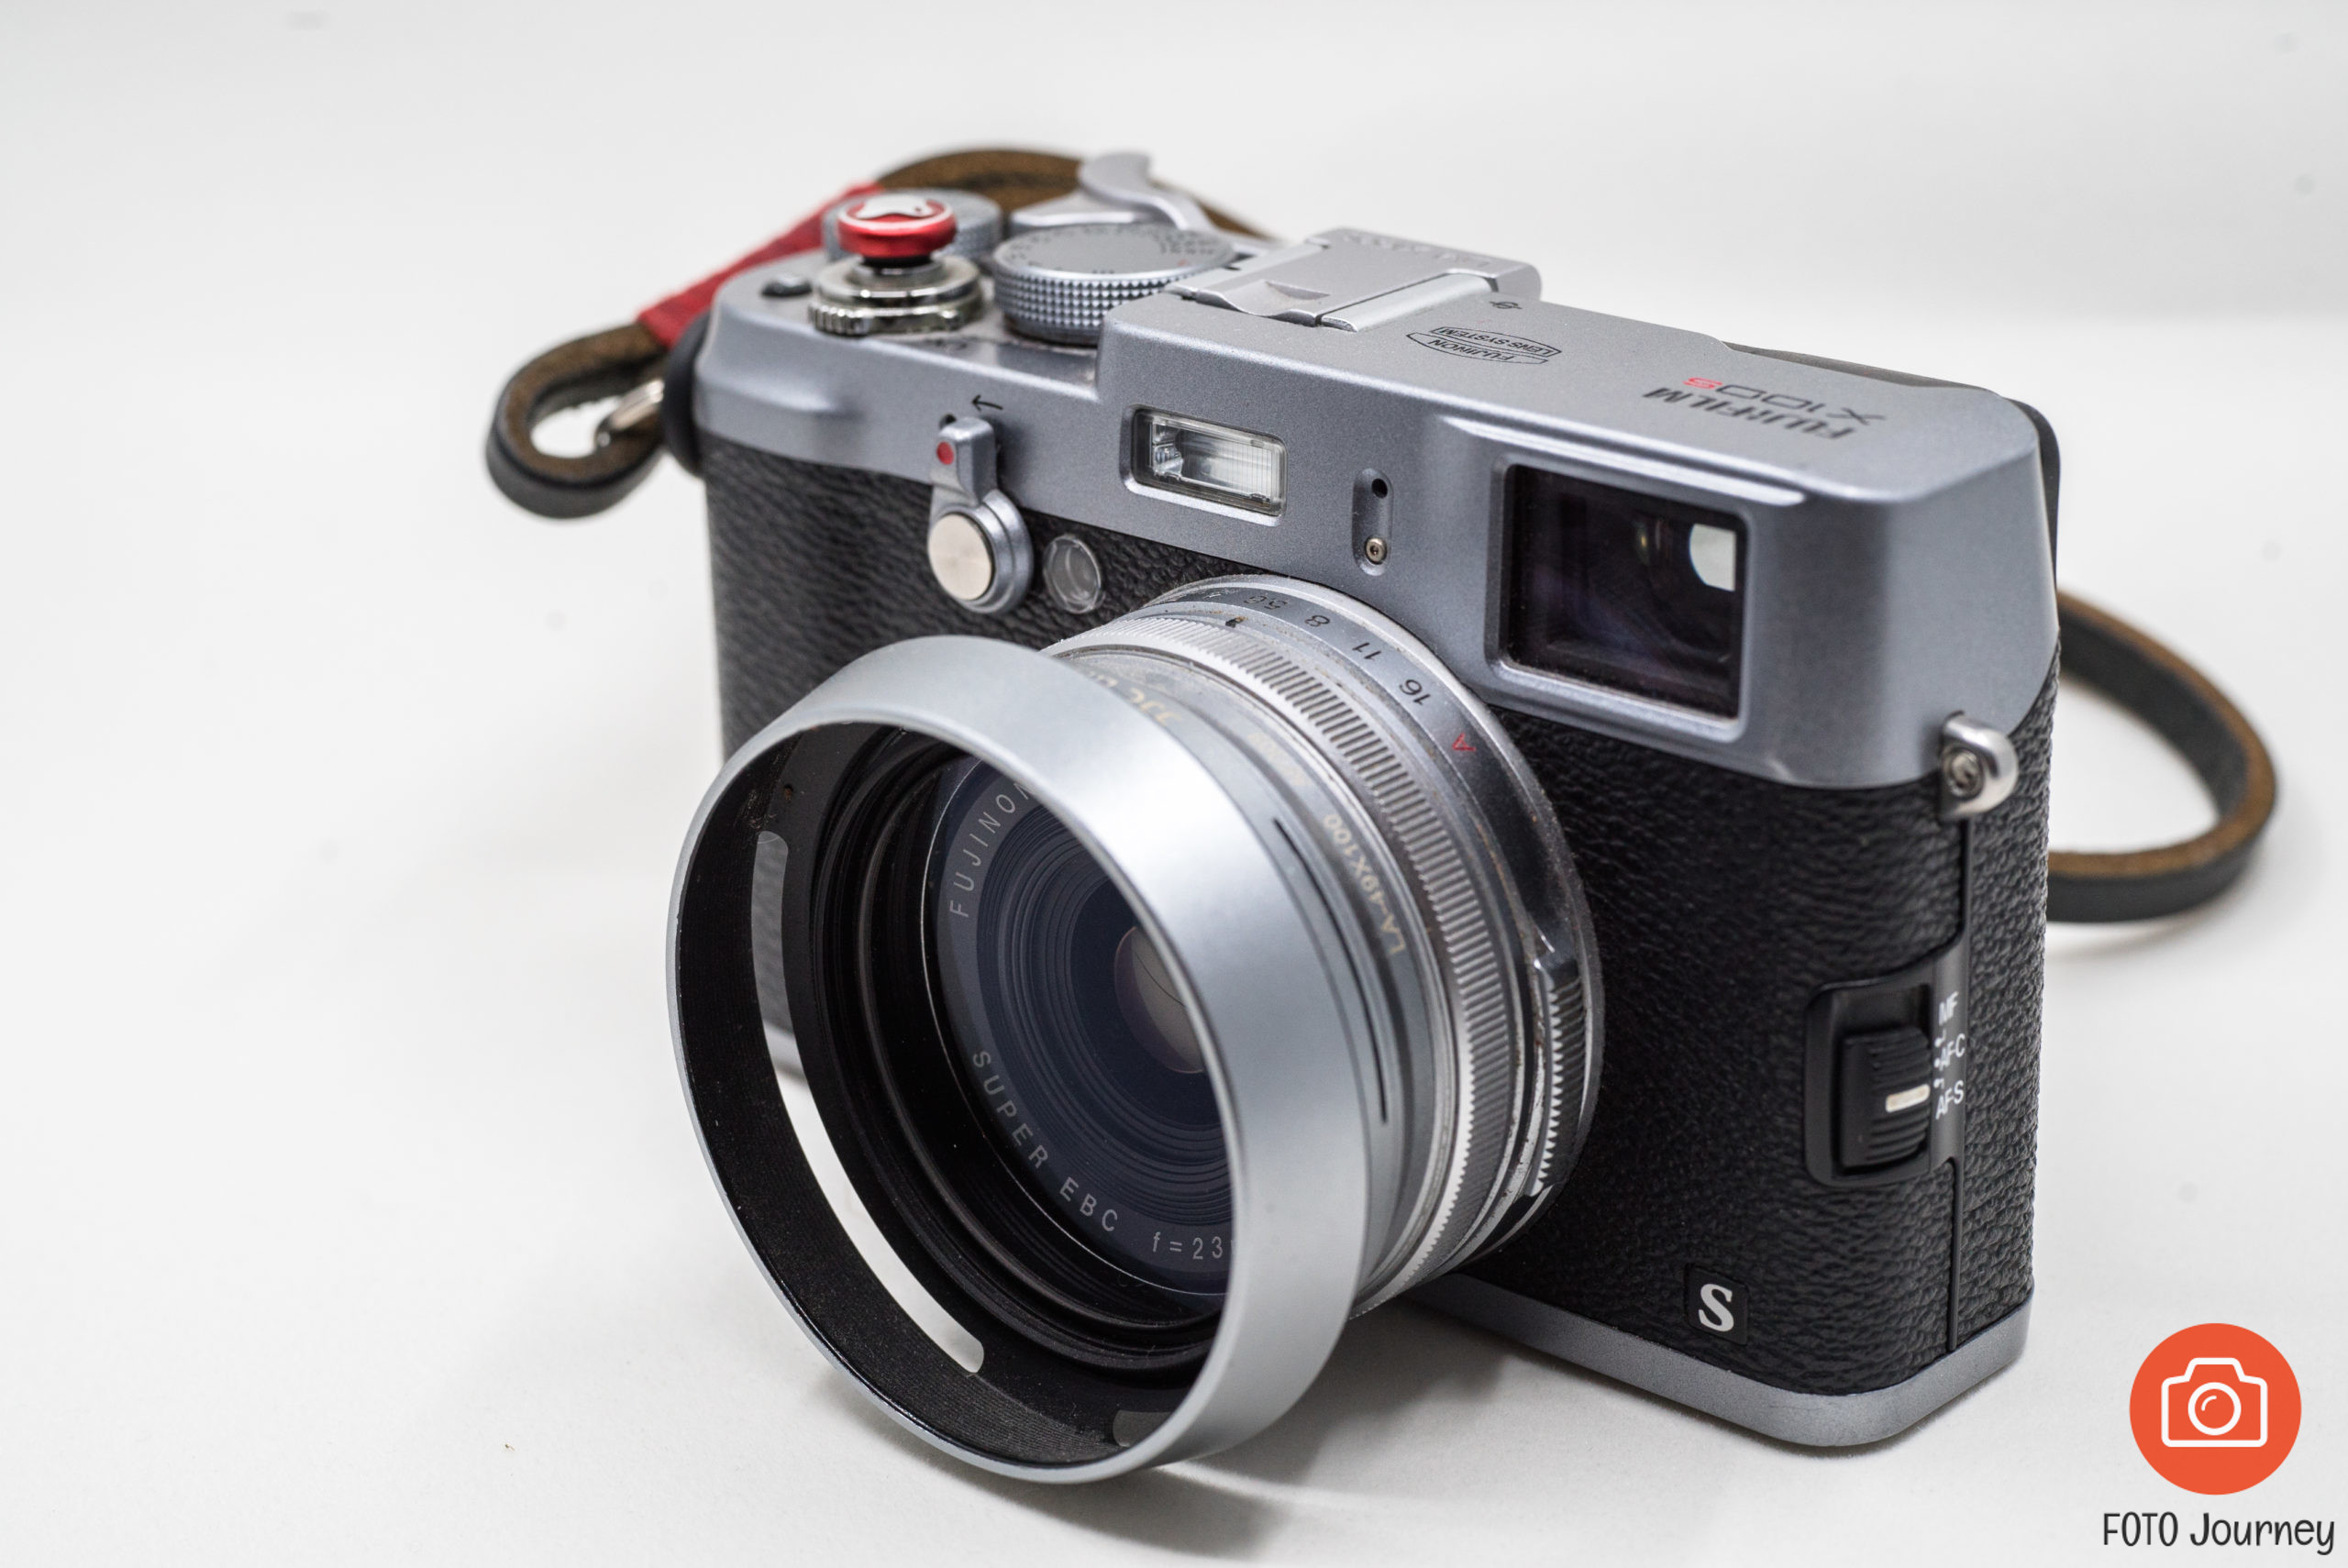 10 Shooting the Fuji X100s, my beloved old camera - My Journey